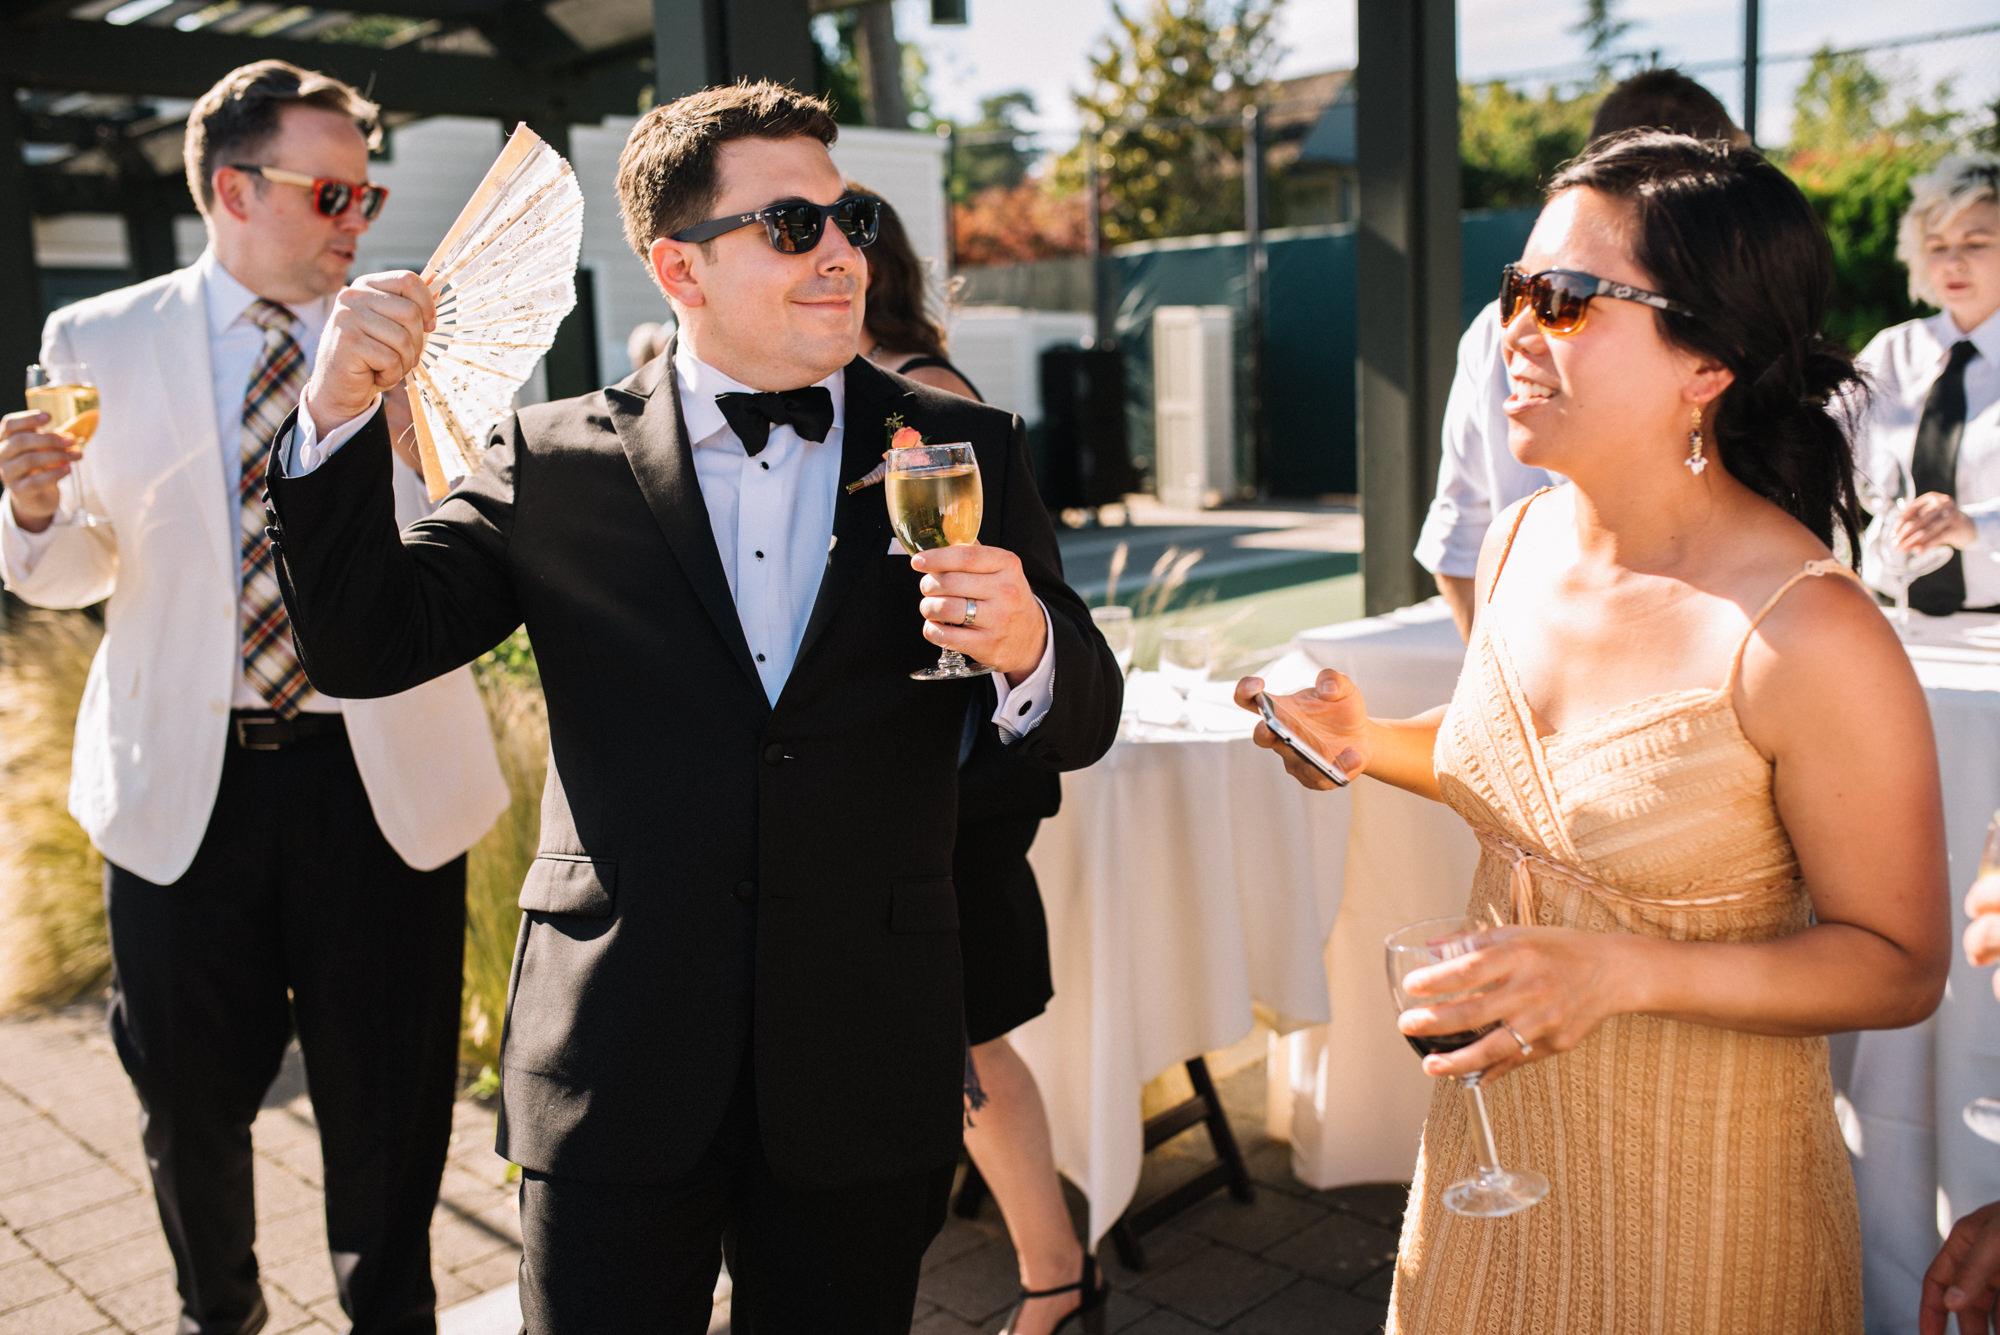 Ryan goofs around at their cocktail reception after the wedding ceremony at the Seattle Tennis Club, a wedding venue in Seattle. Summer 2016. Photo by Seattle Wedding Photographers Jennifer Tai Photo Artistry.